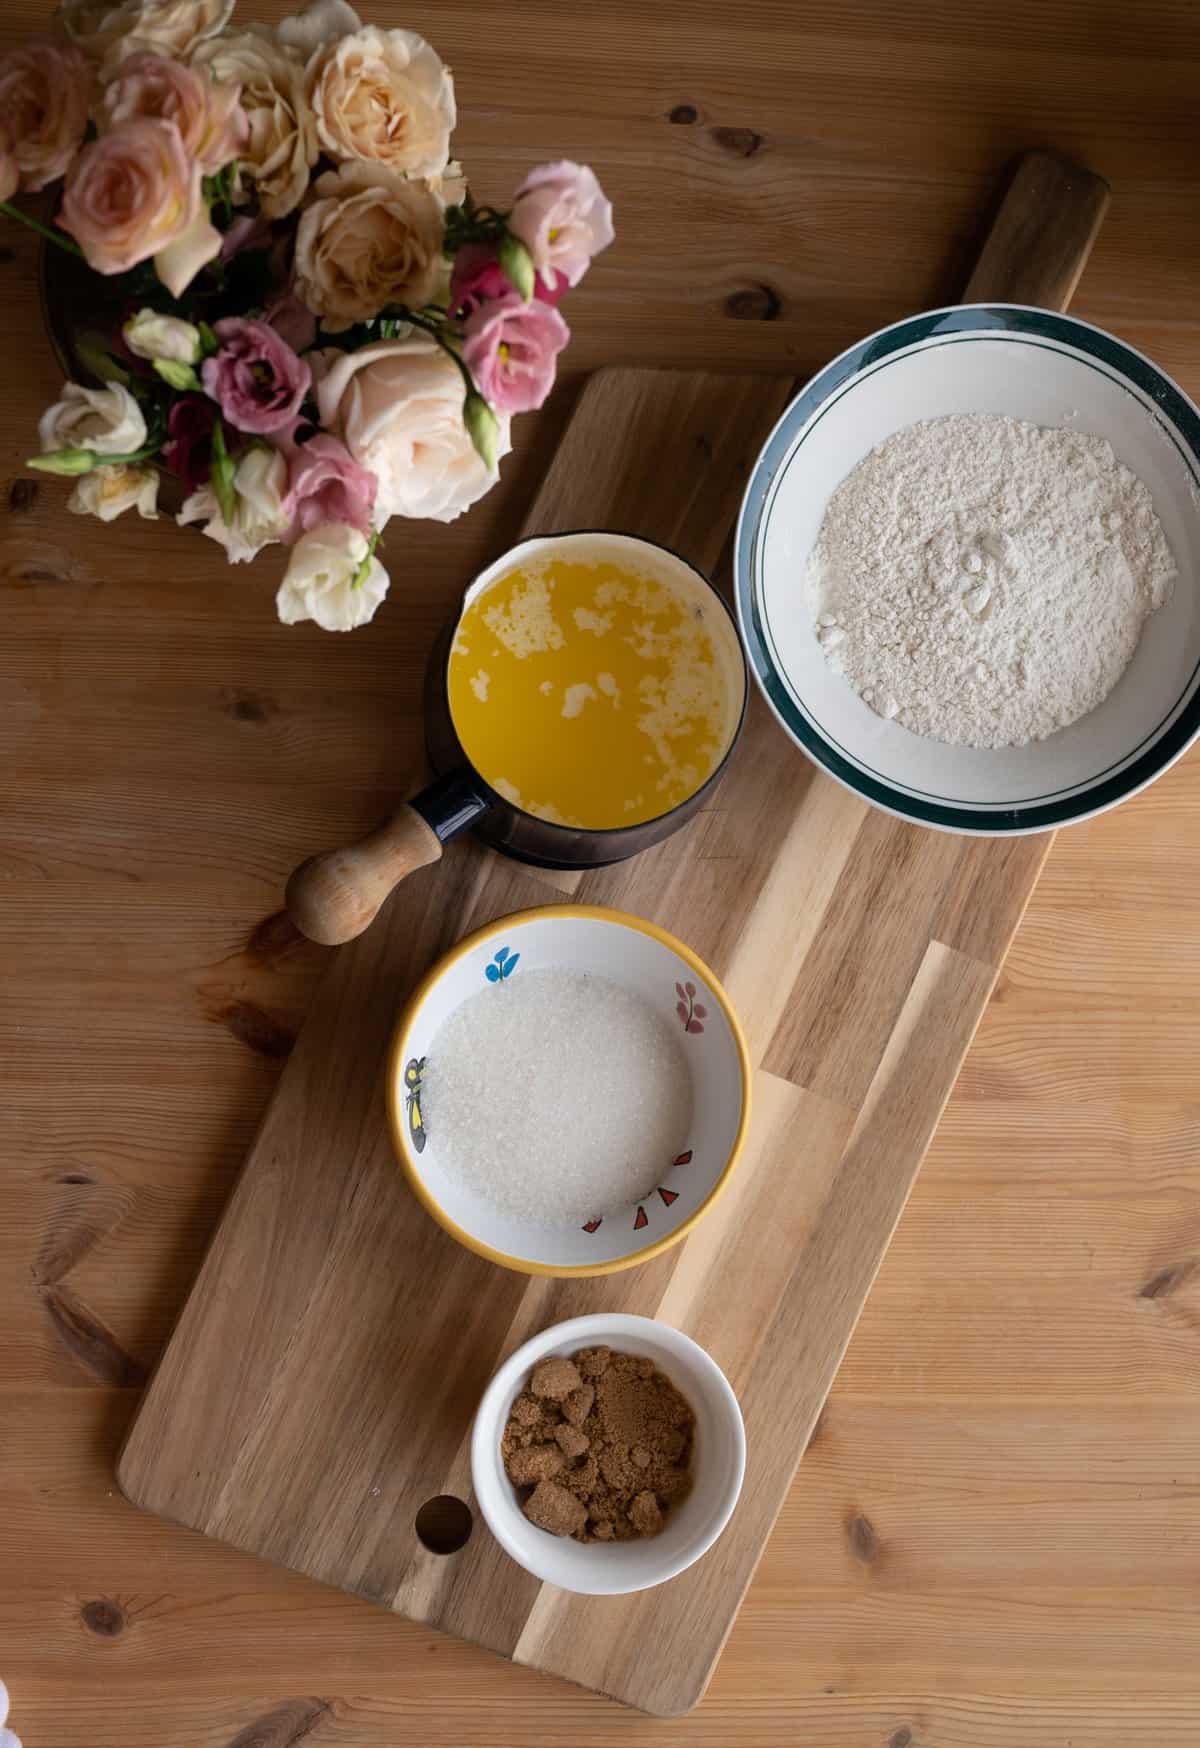 ingredients of crumble topping in bowls and dishes